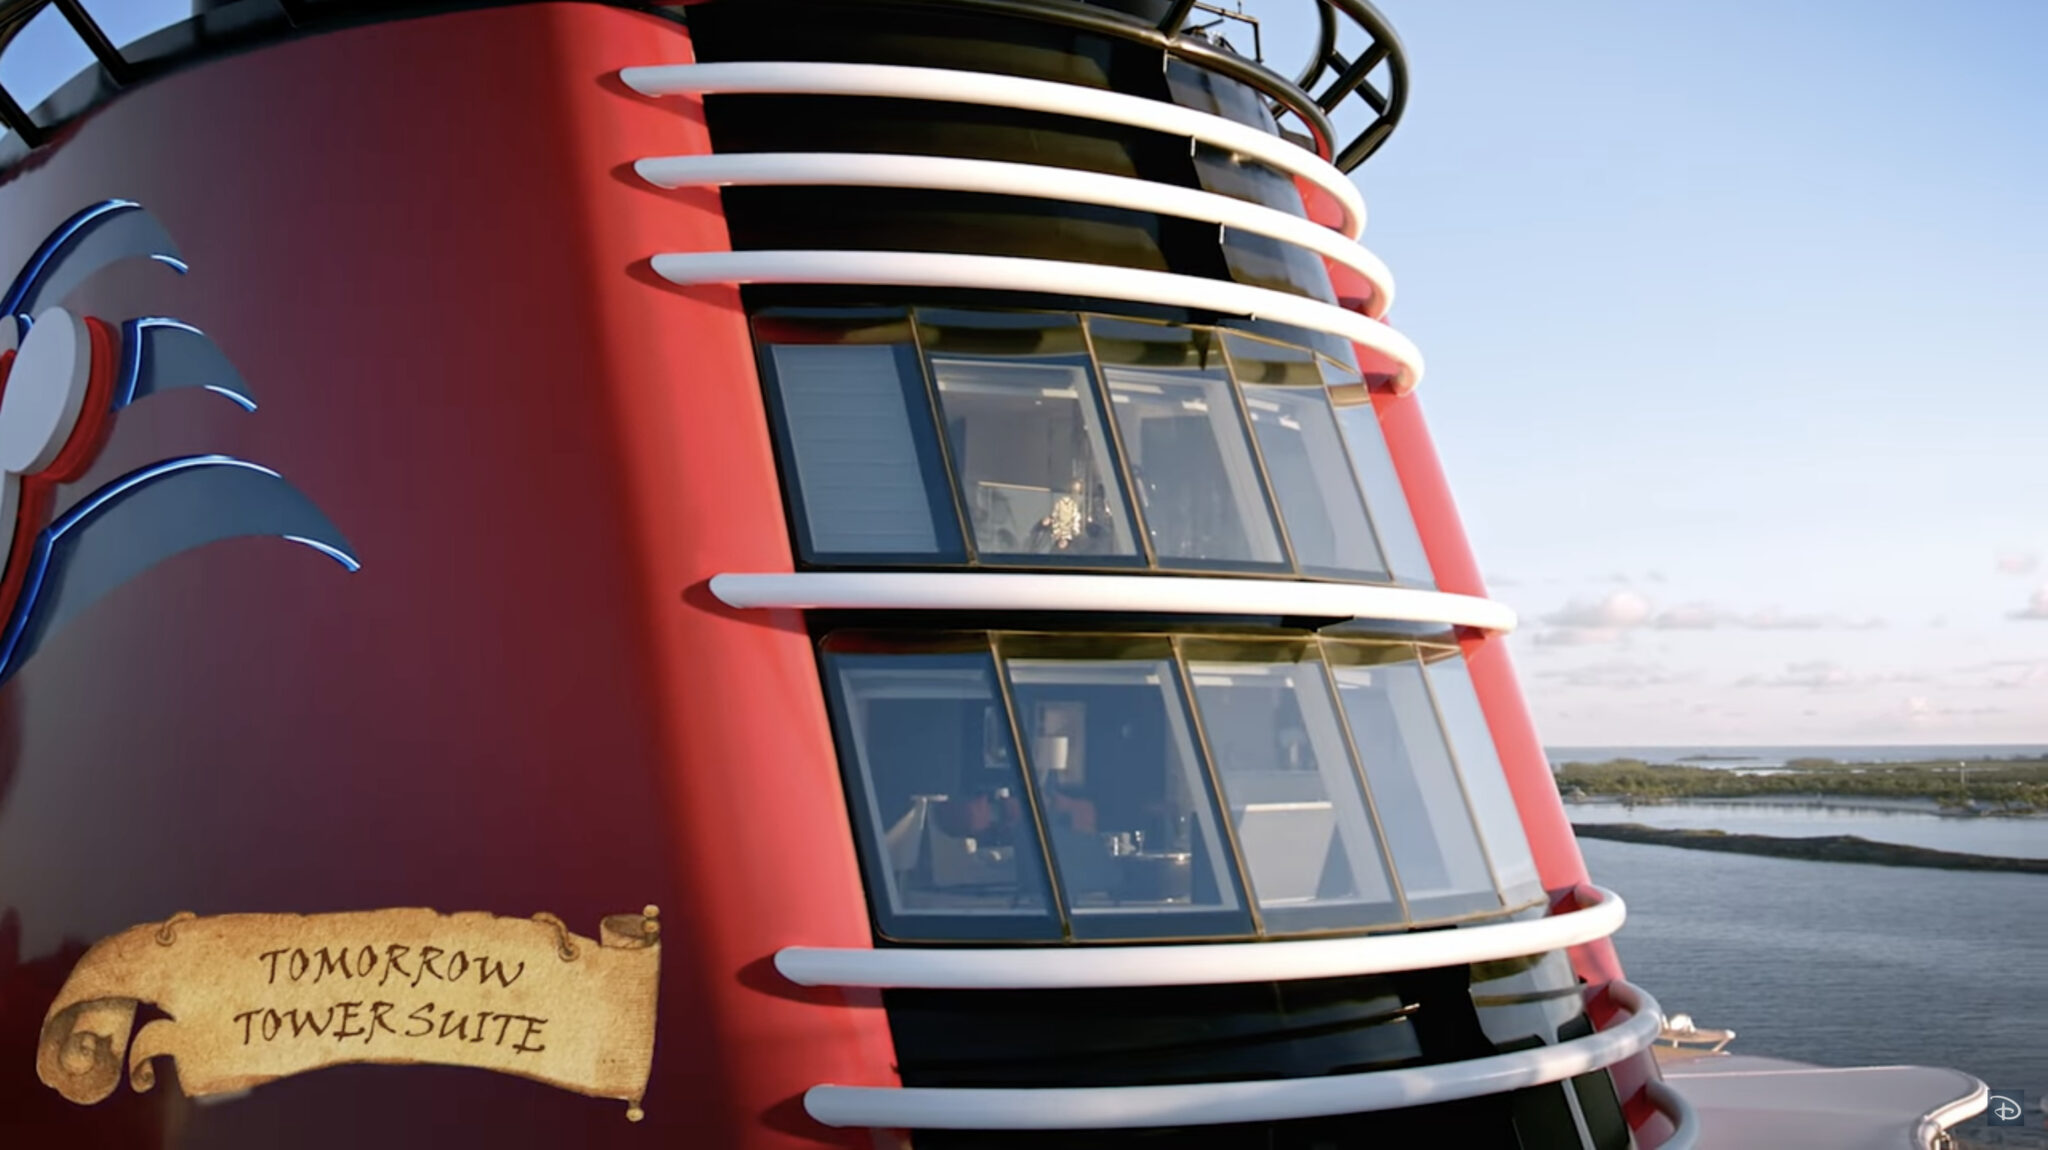 New Details About Disney Cruise Line’s Newest Ship, the Disney Treasure